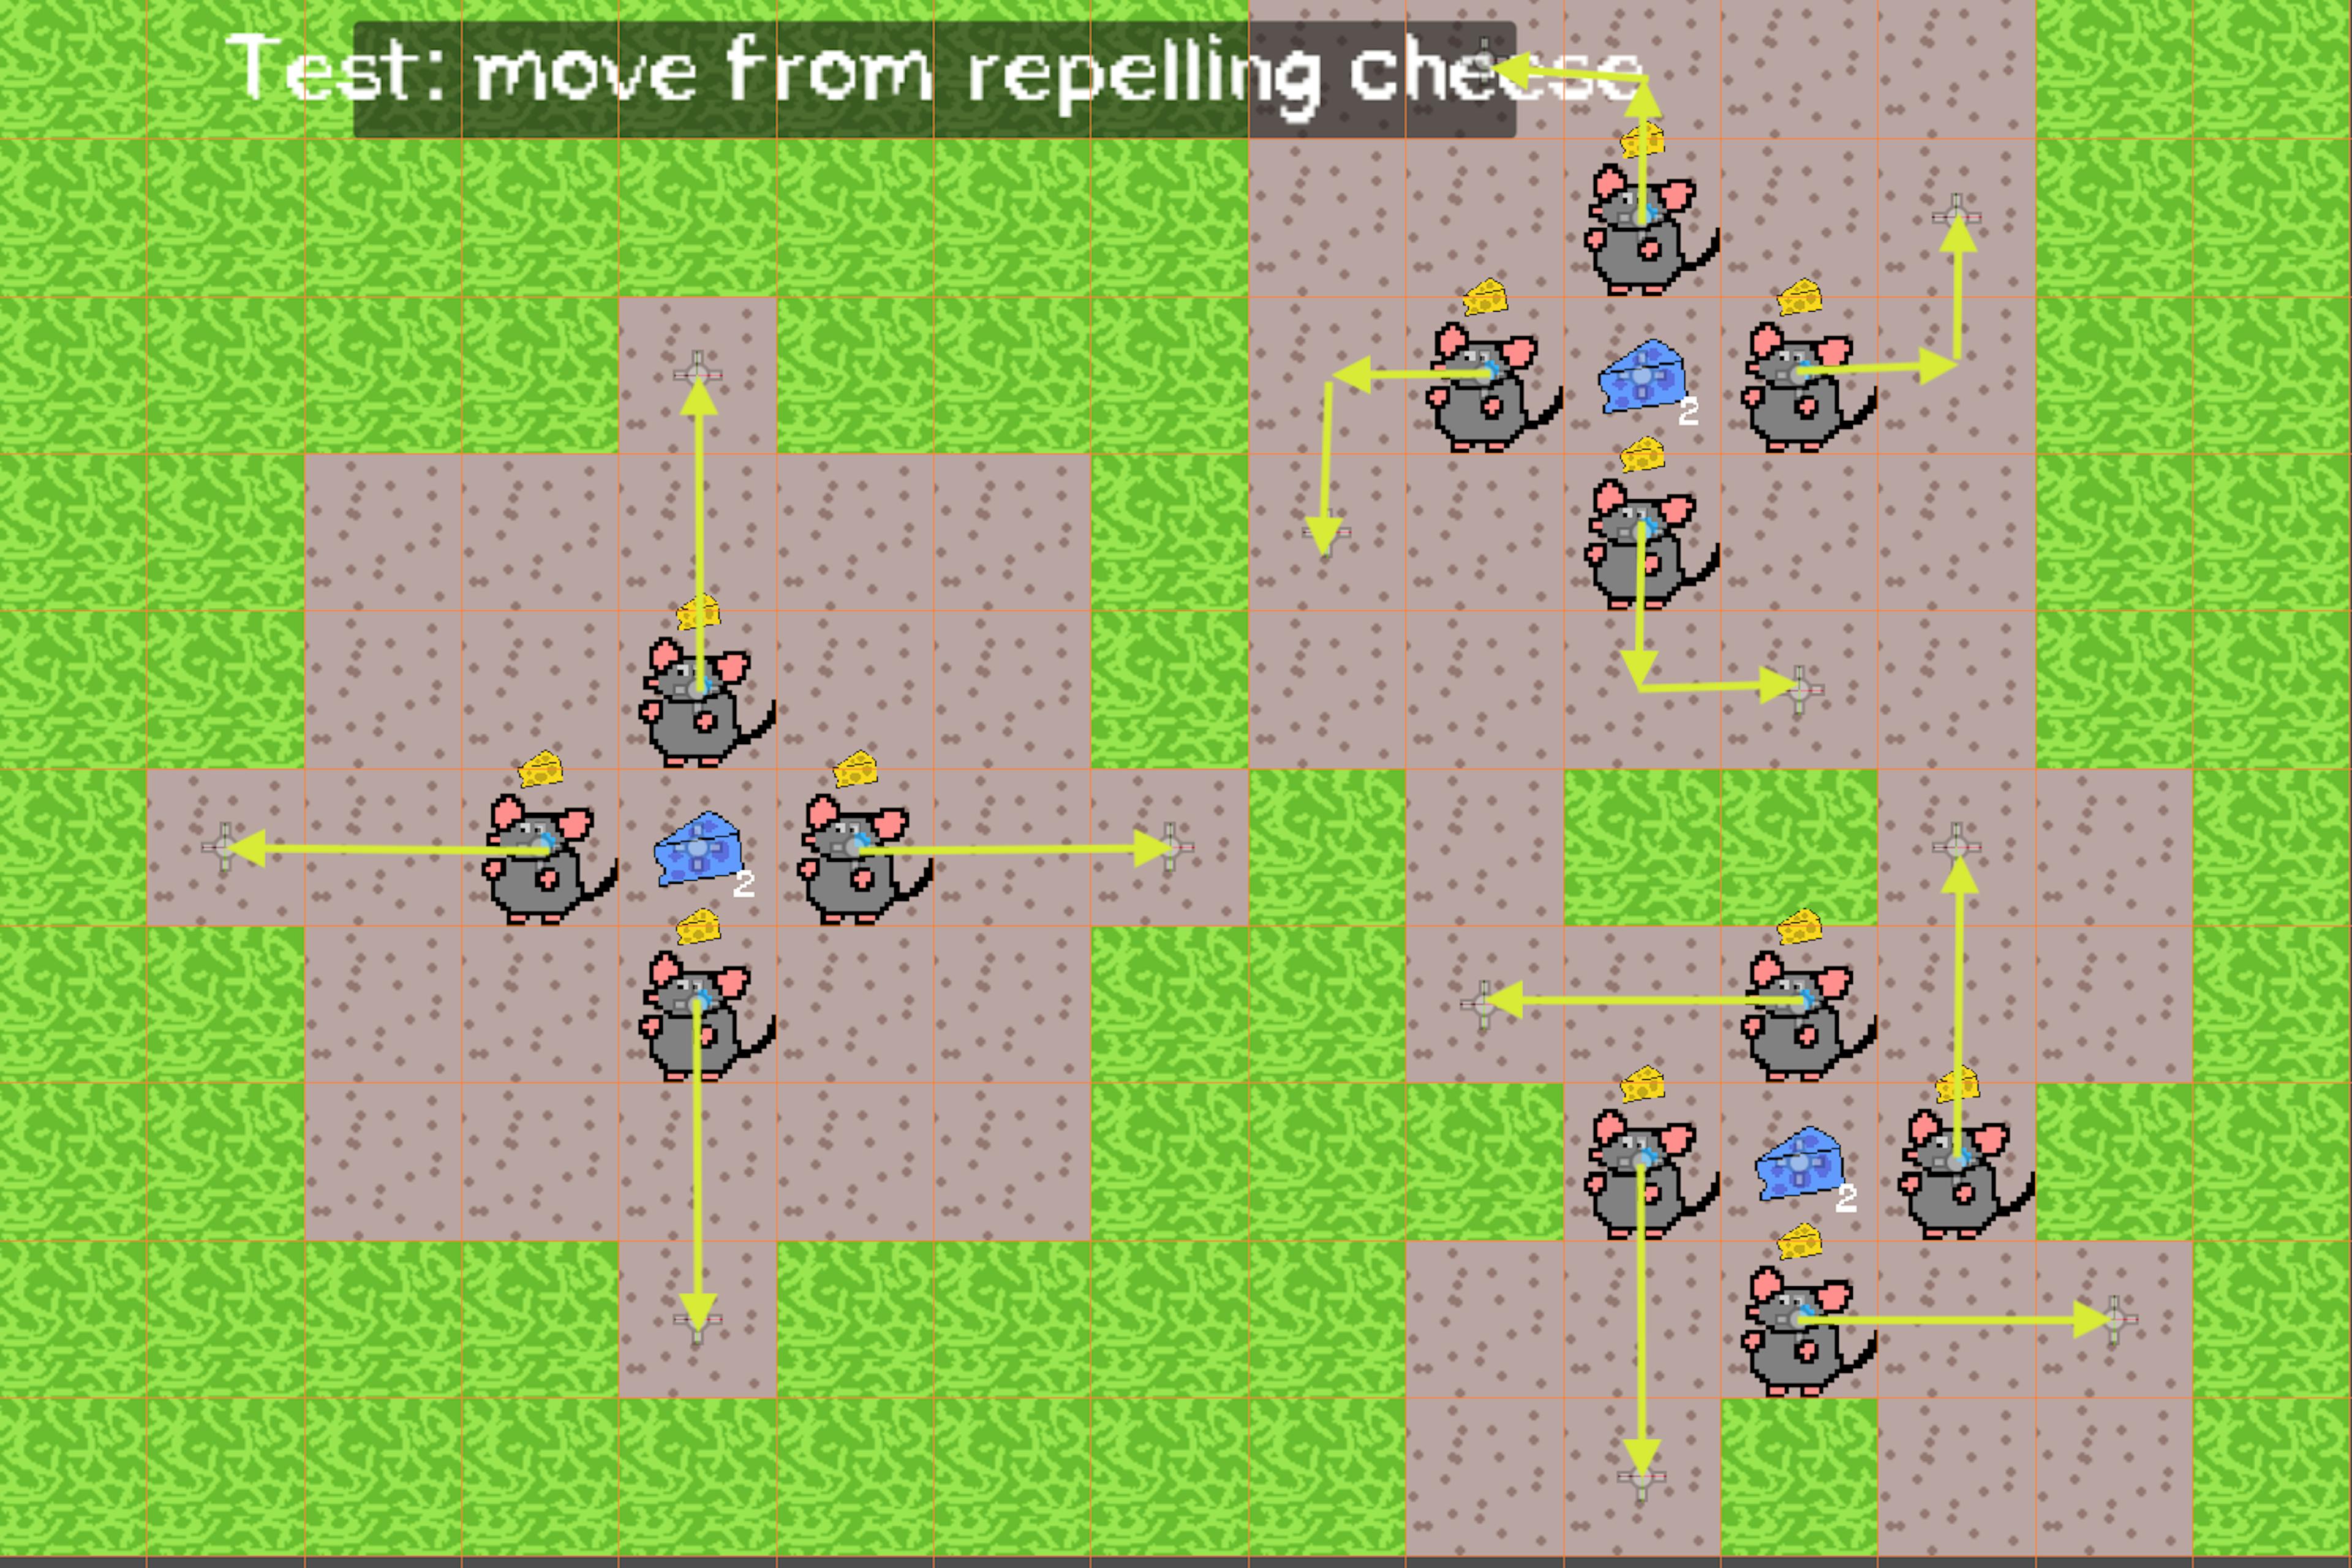 The resulting test map for 'repel' mechanic testing